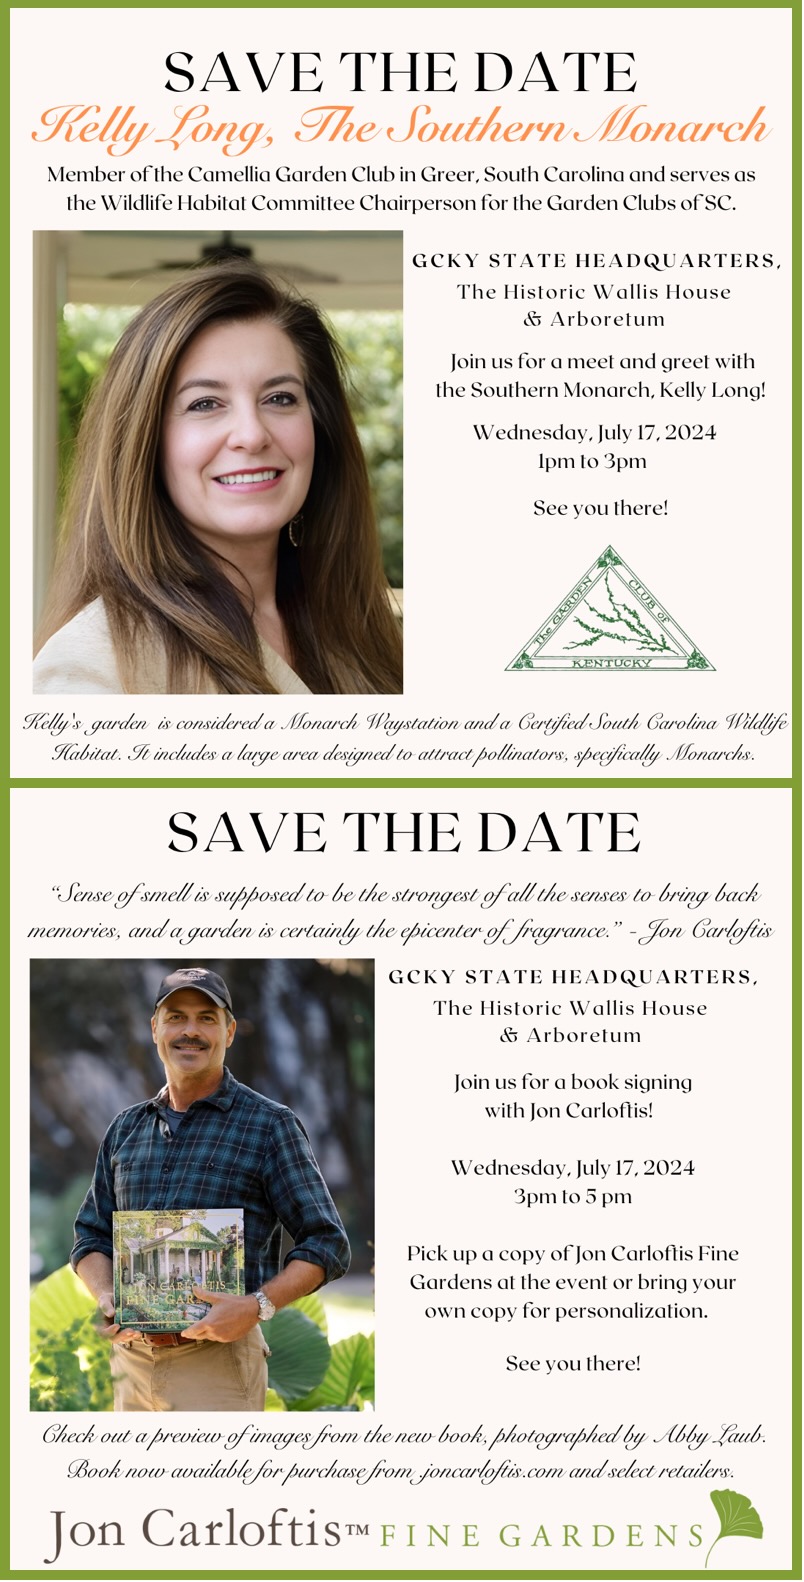 Kelly Long and Jon Carloftis - Two Great Events for Gardeners!